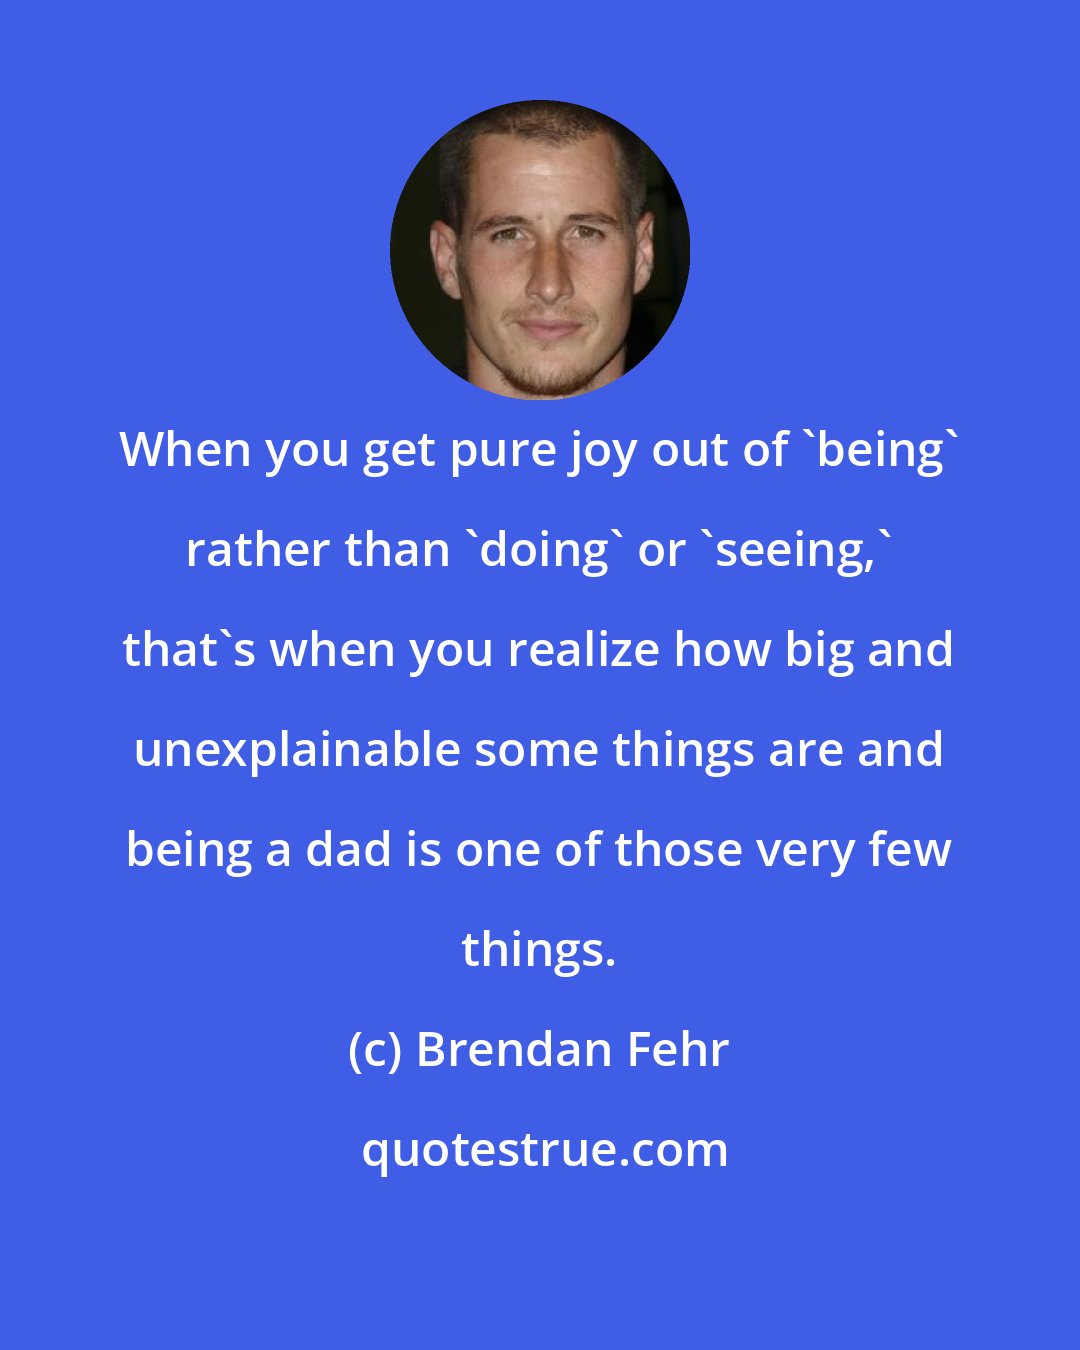 Brendan Fehr: When you get pure joy out of 'being' rather than 'doing' or 'seeing,' that's when you realize how big and unexplainable some things are and being a dad is one of those very few things.